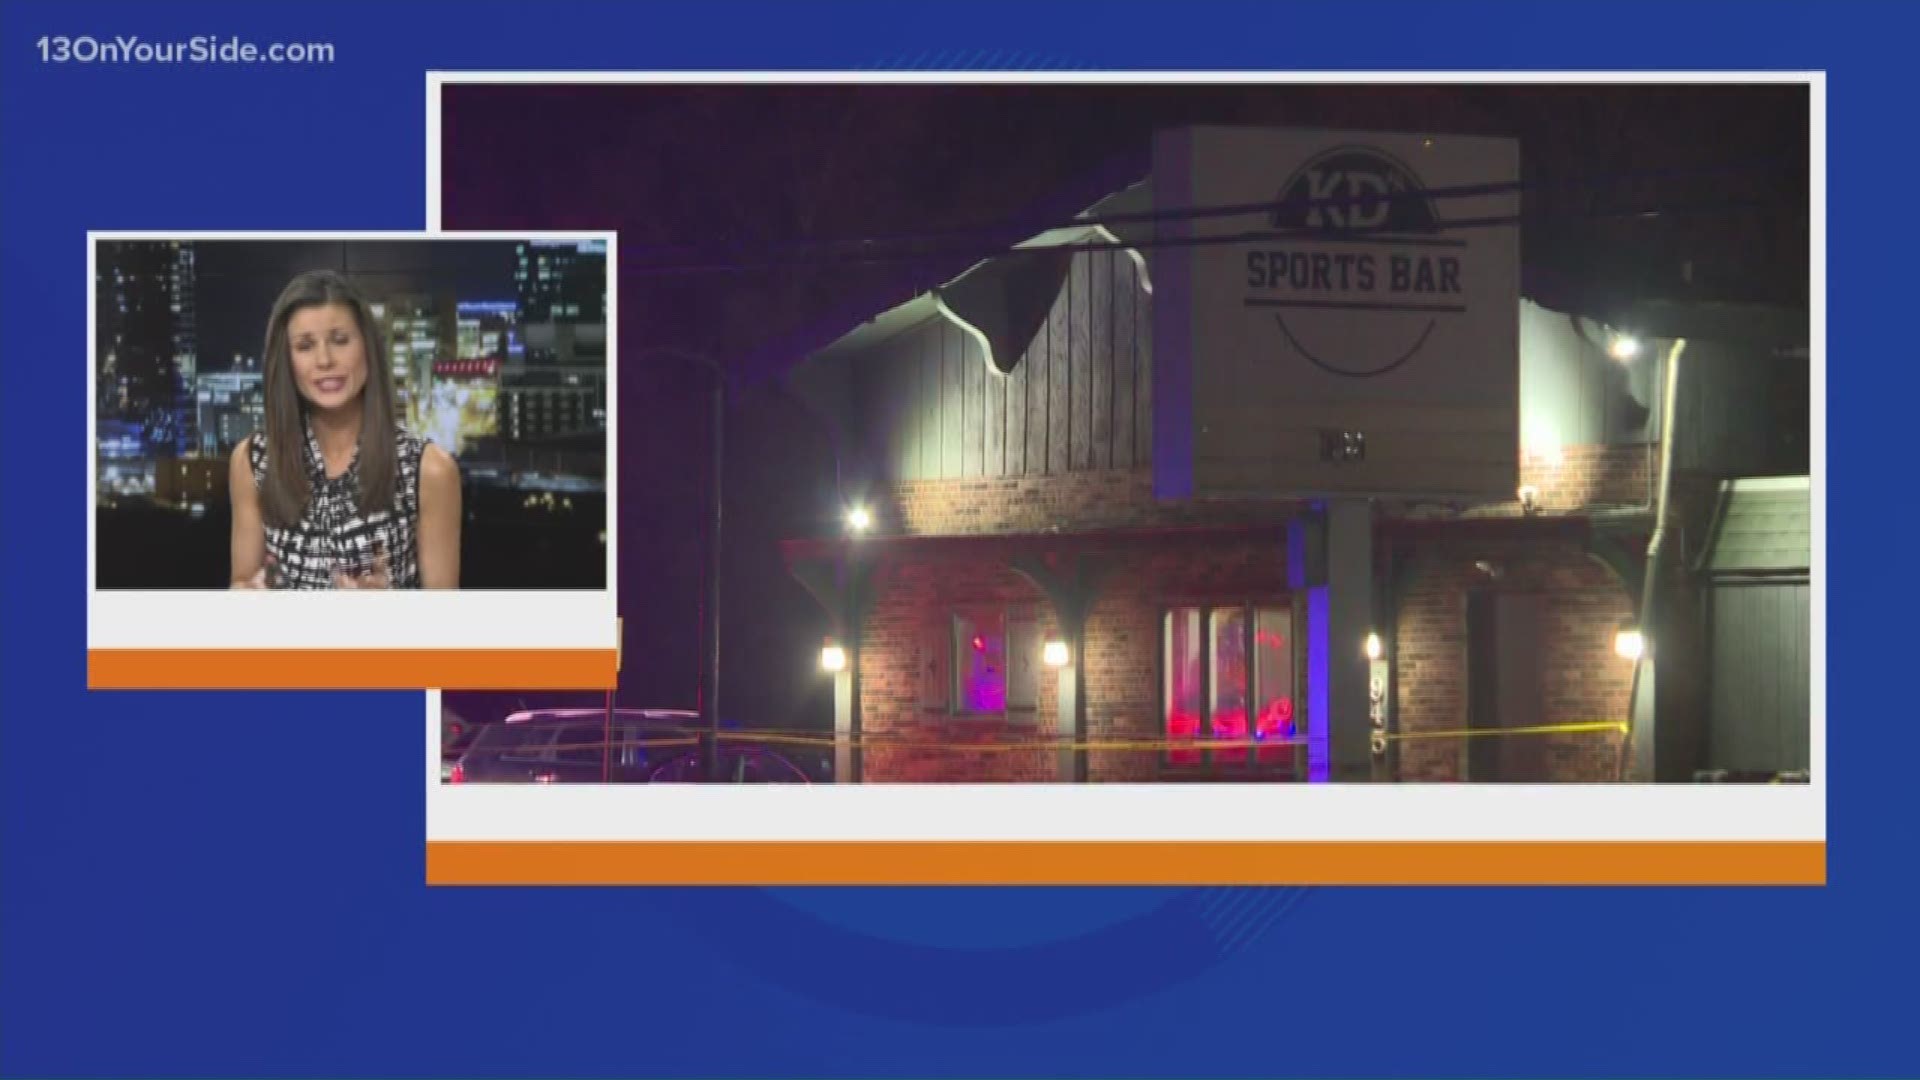 Police in Wyoming are investigating a shooting that happened at a sports bar in Wyoming overnight Friday.